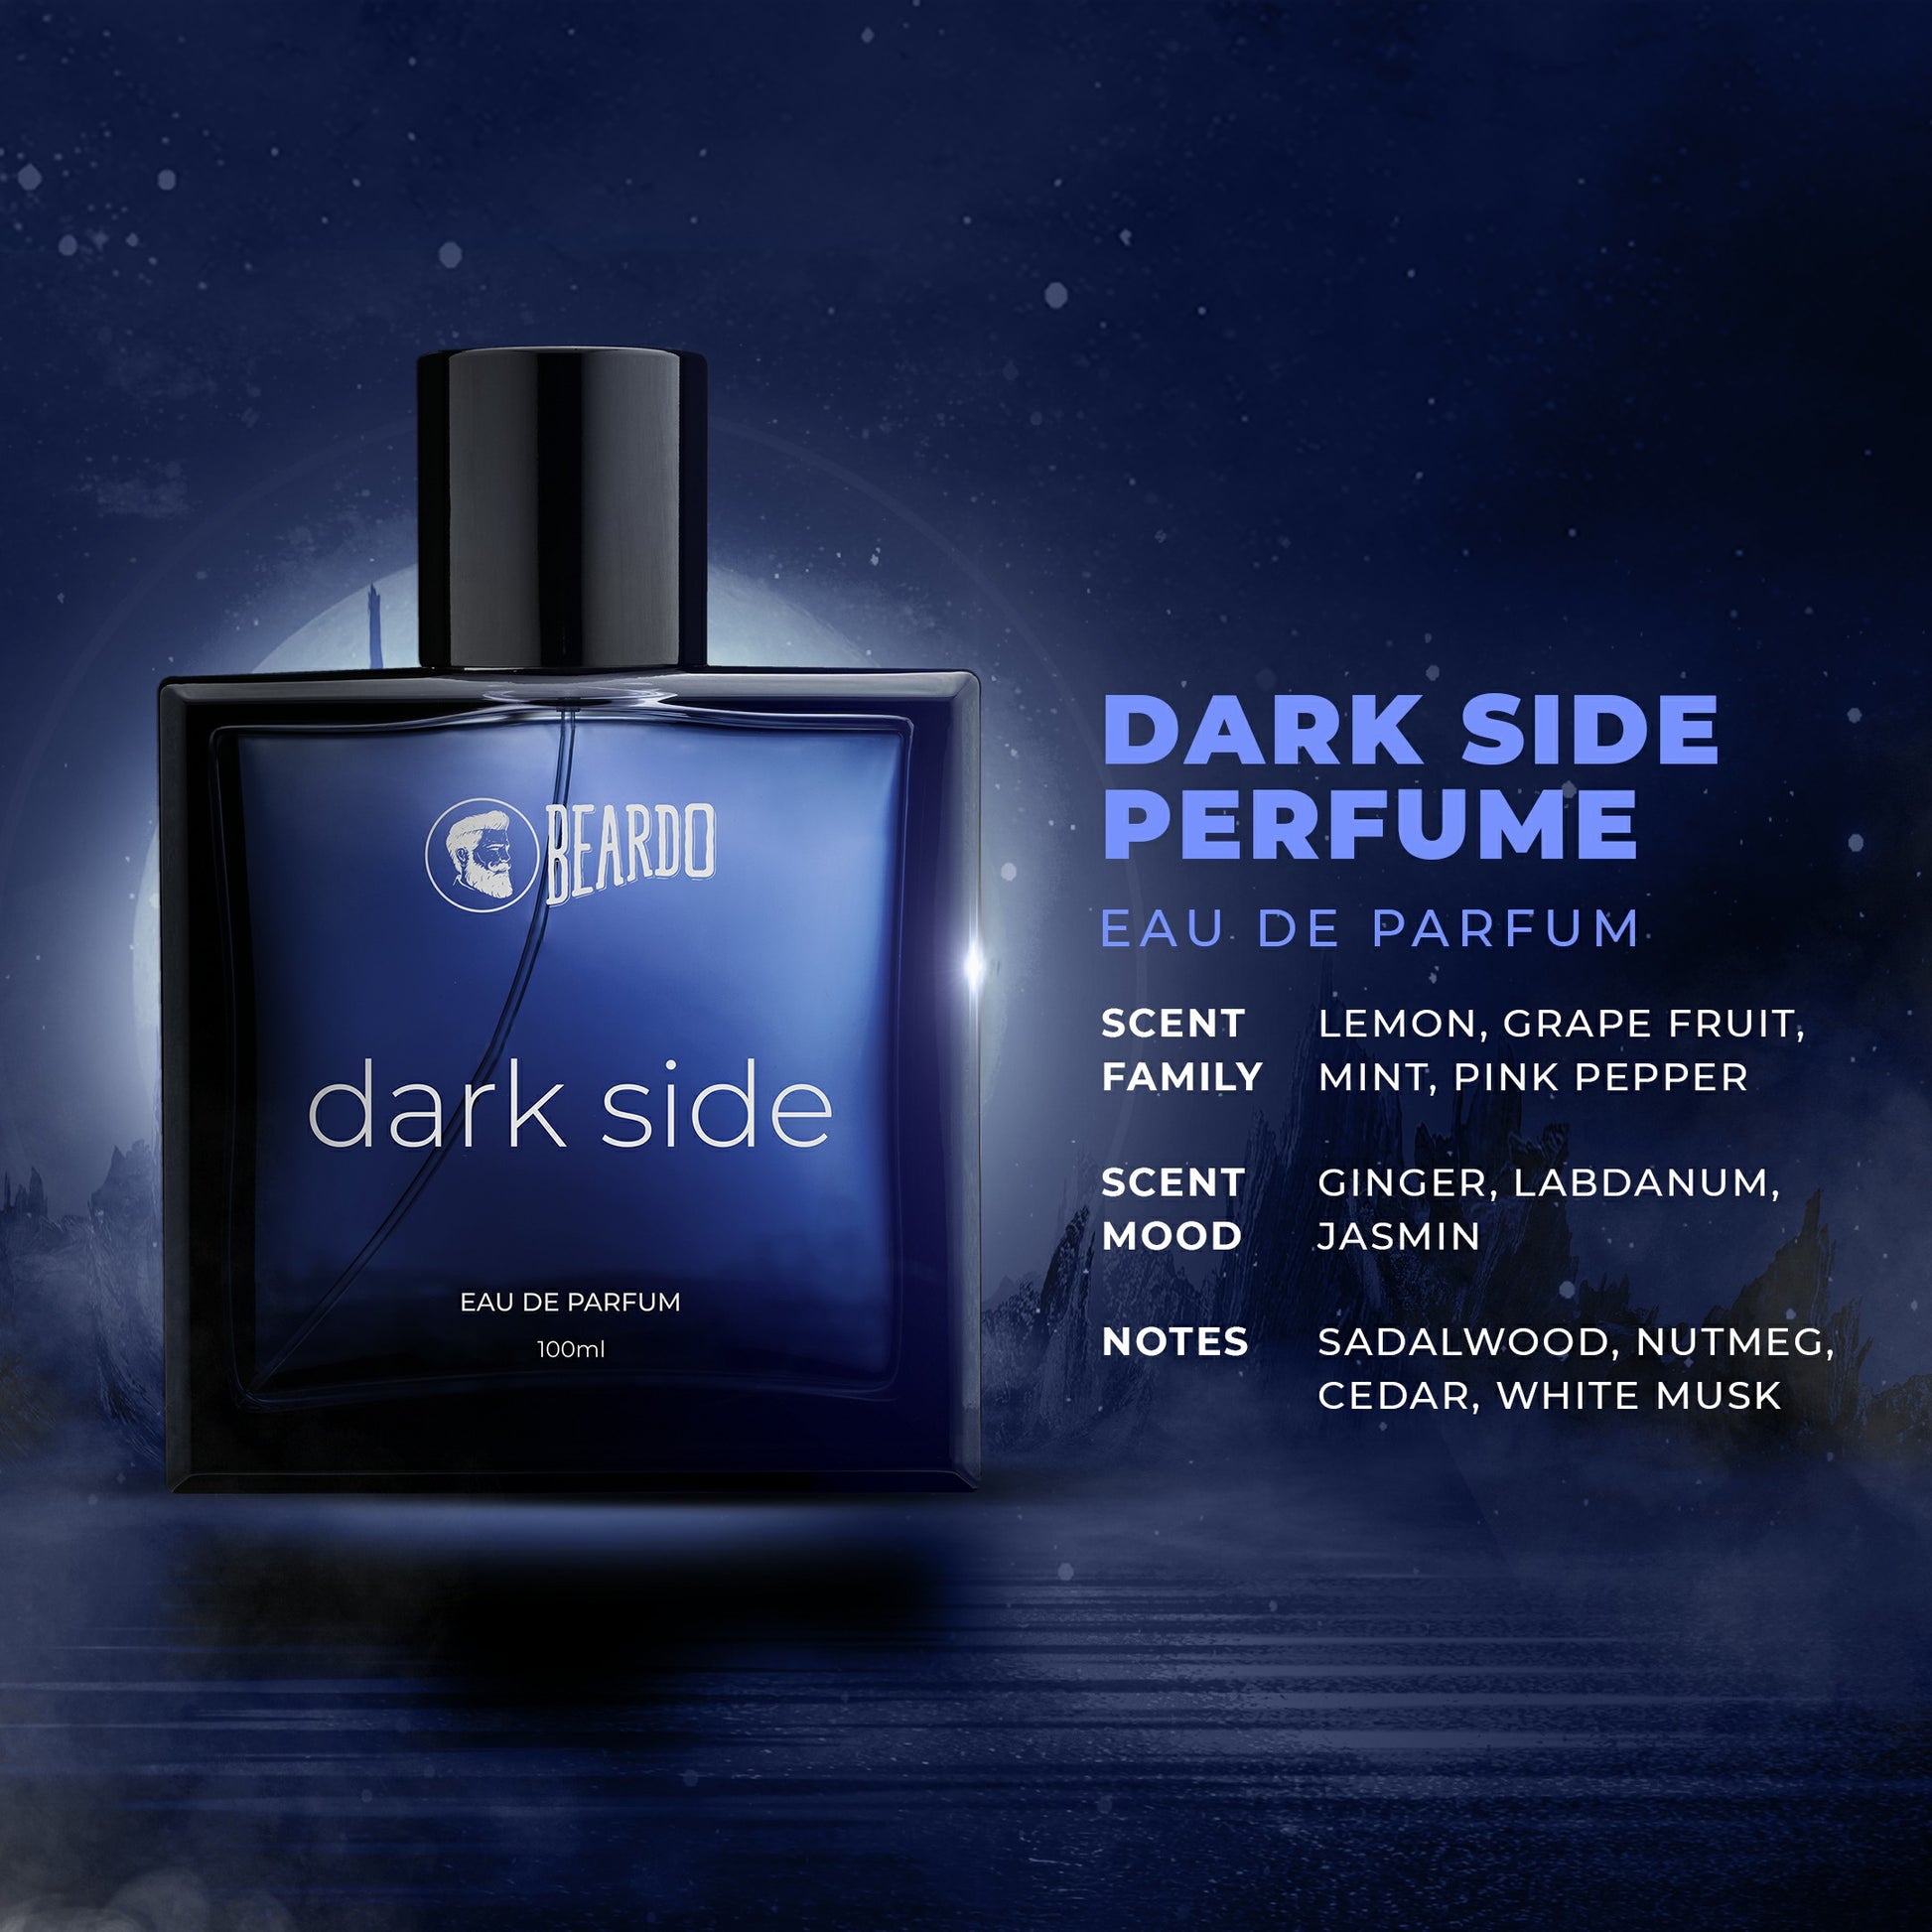 mint, sandalwood, nutmeg scent, white musk, How does dark side perfume smell like, Which is No 1 perfume for men, Which perfume smell is best for boys, Which top perfume is best,